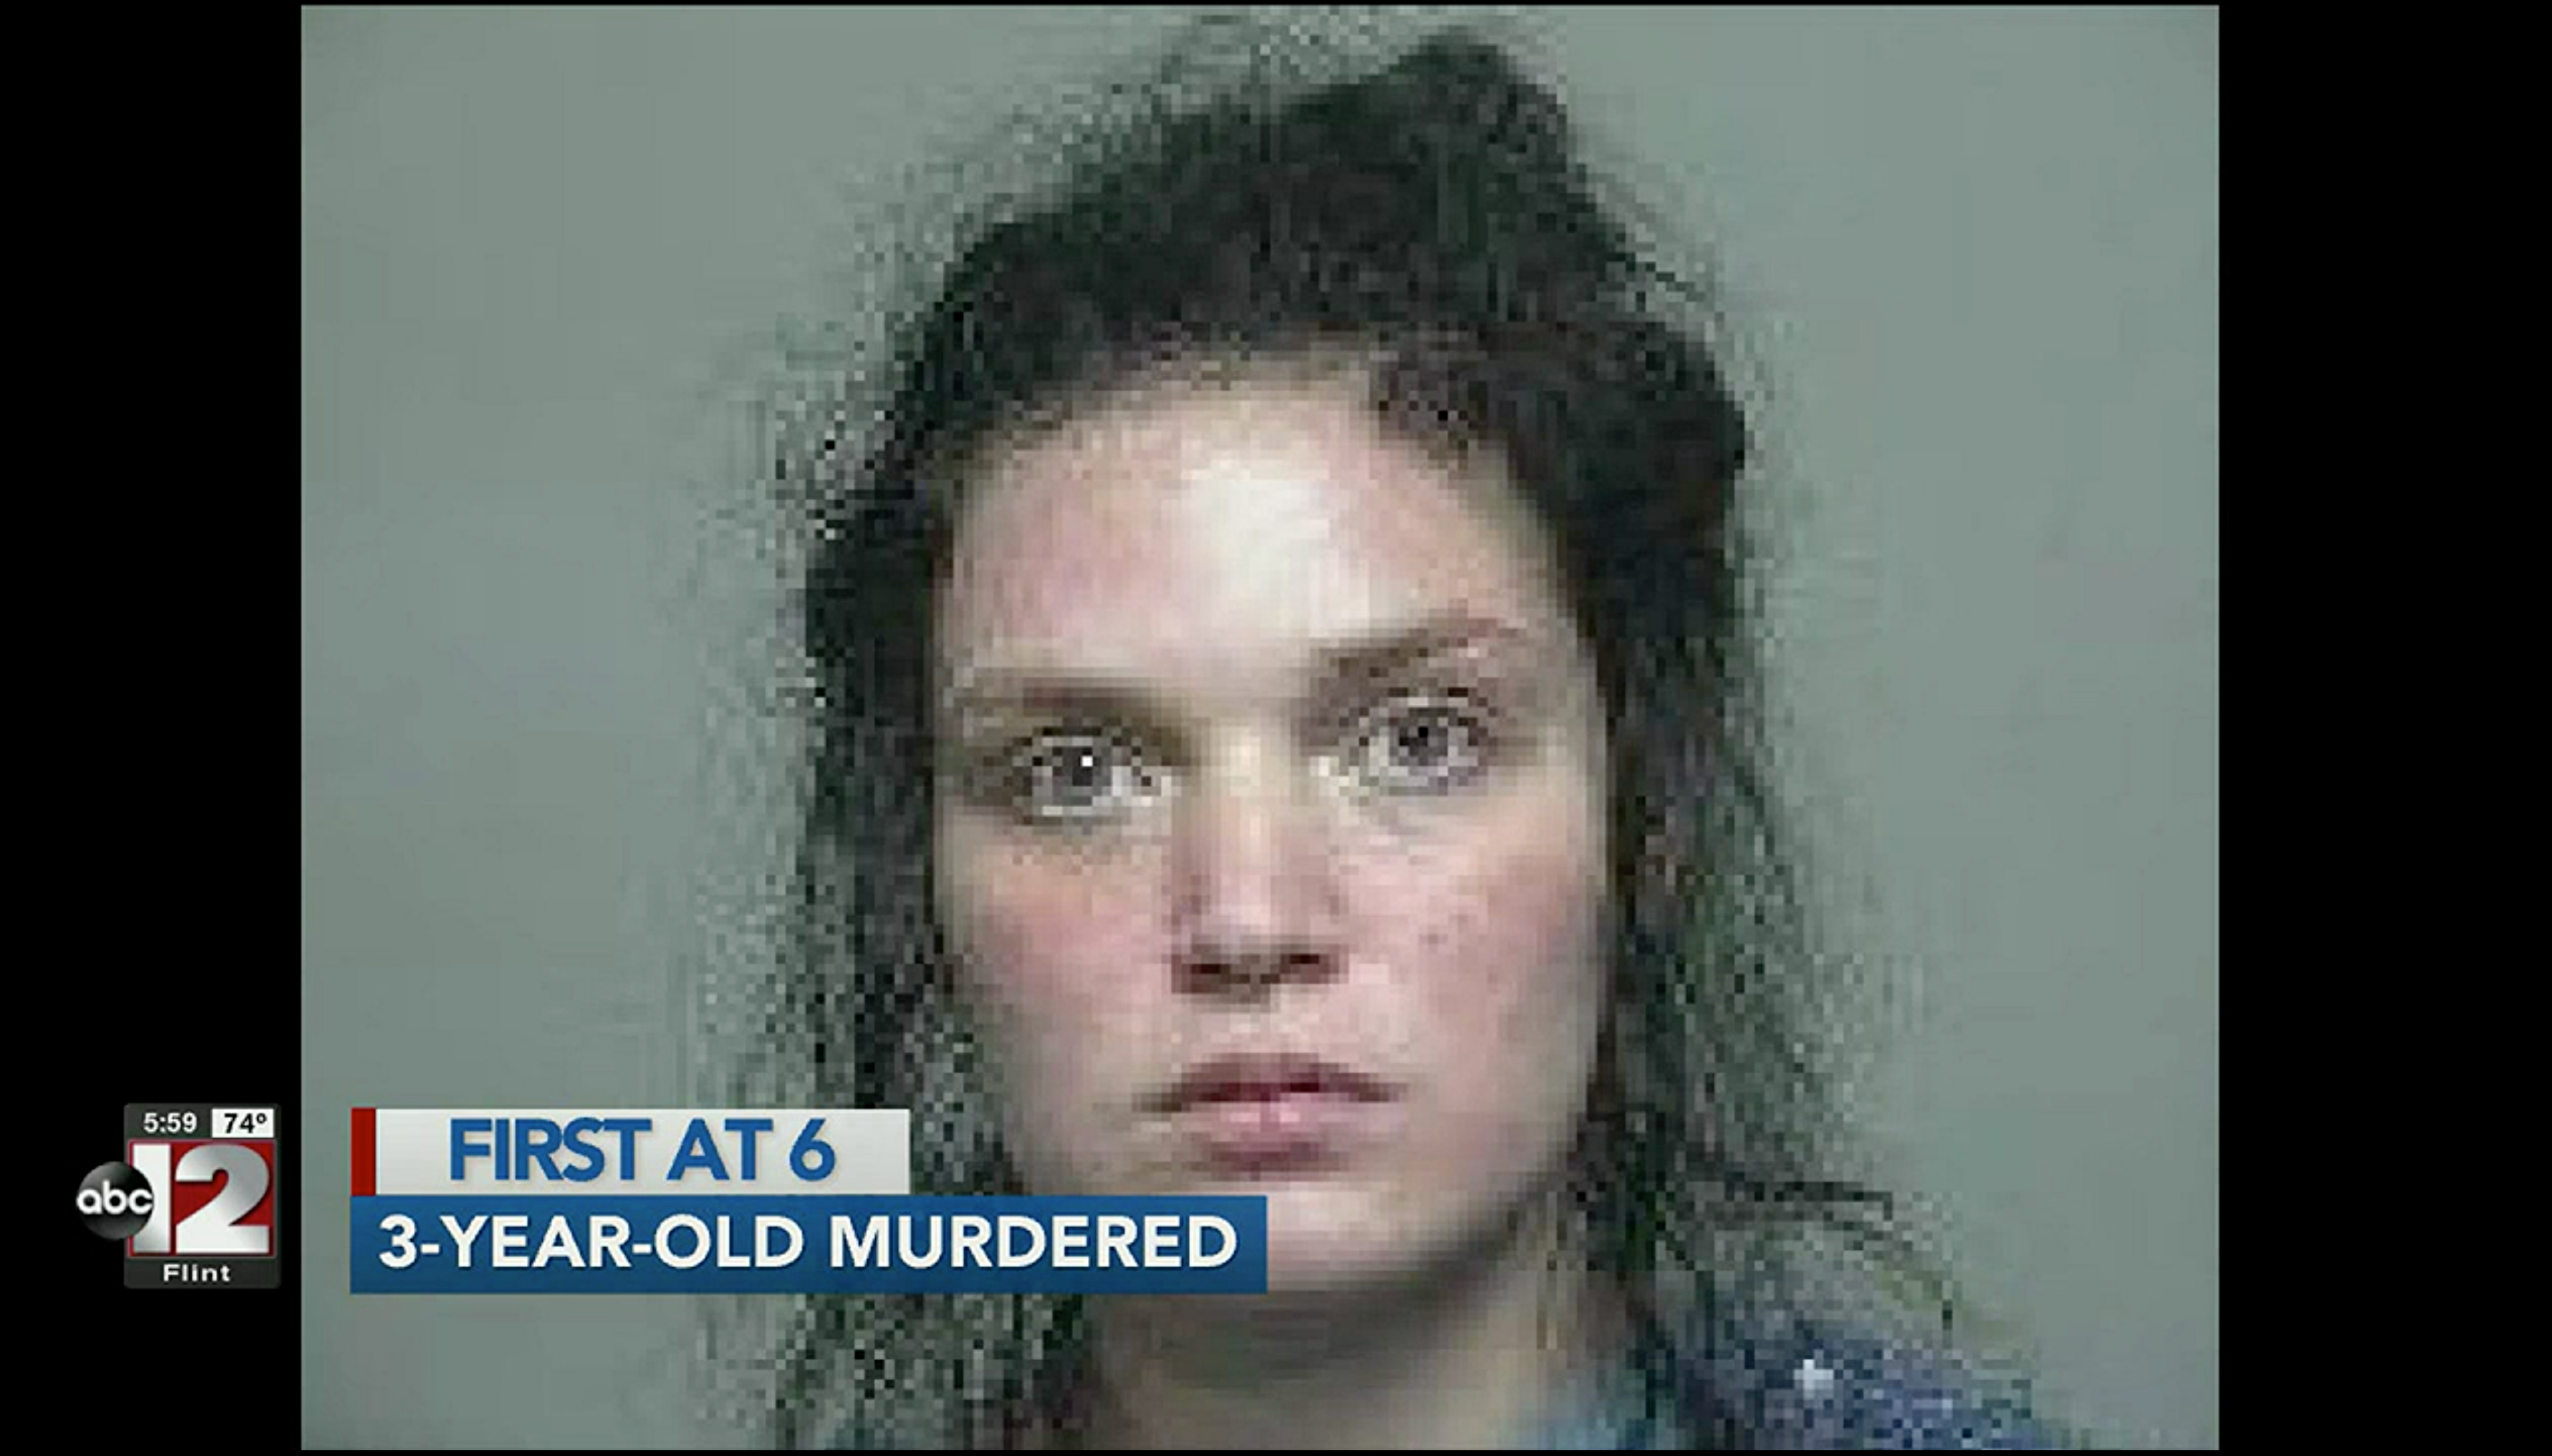 File: Justine Johnson has been charged with murder and first-degree child abuse over the death of her daughter